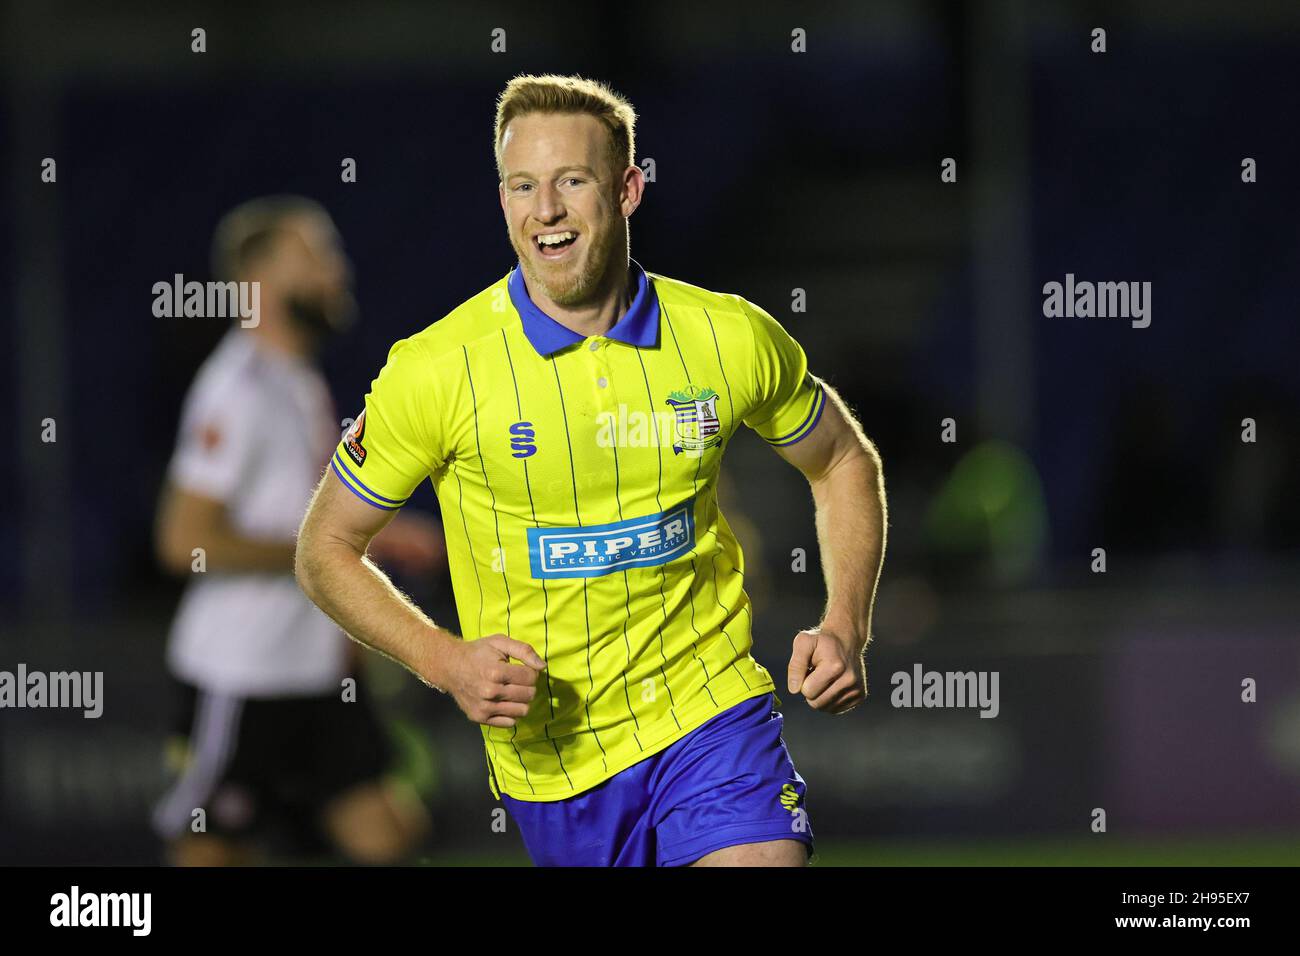 SOLIHULL, ENGLAND. DECEMBER 4TH 2021. Adam Rooney of Solihull Moors celebrates after scoring their teams second goal during the Vanarama National League match between Solihull Moors and Woking FC at the Armco Stadium, Solihull on Saturday 4th December 2021. (Credit: James Holyoak/Alamy Live News) Stock Photo